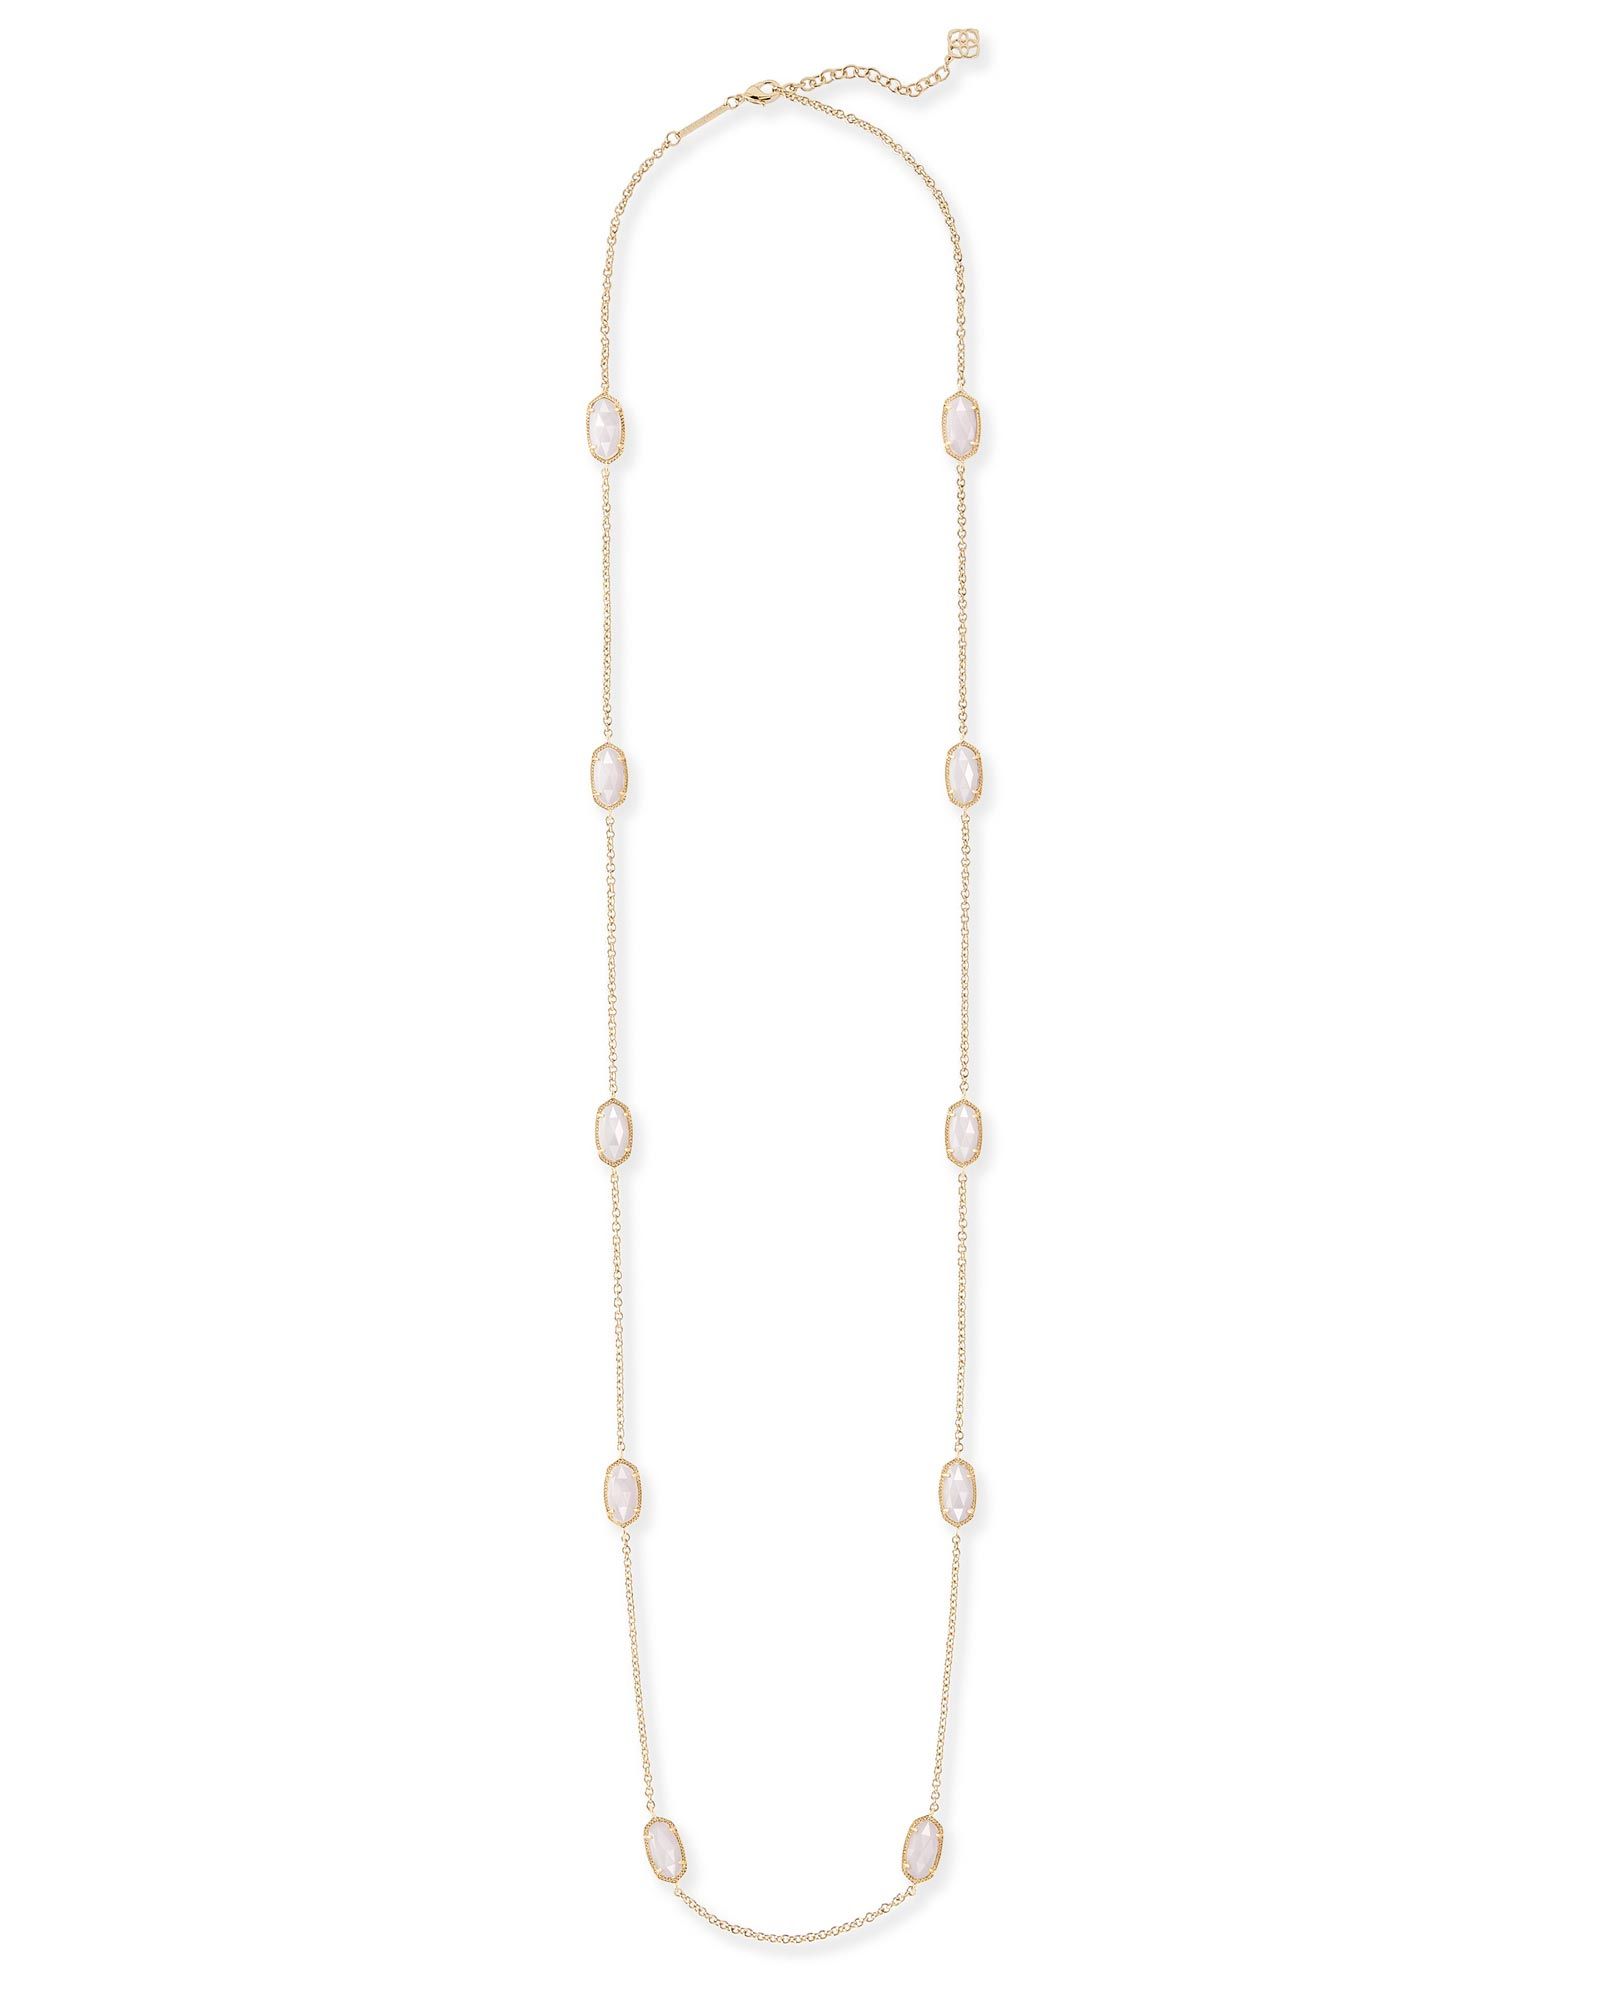 Kellie Gold Long Necklace in White Pearl | Kendra Scott